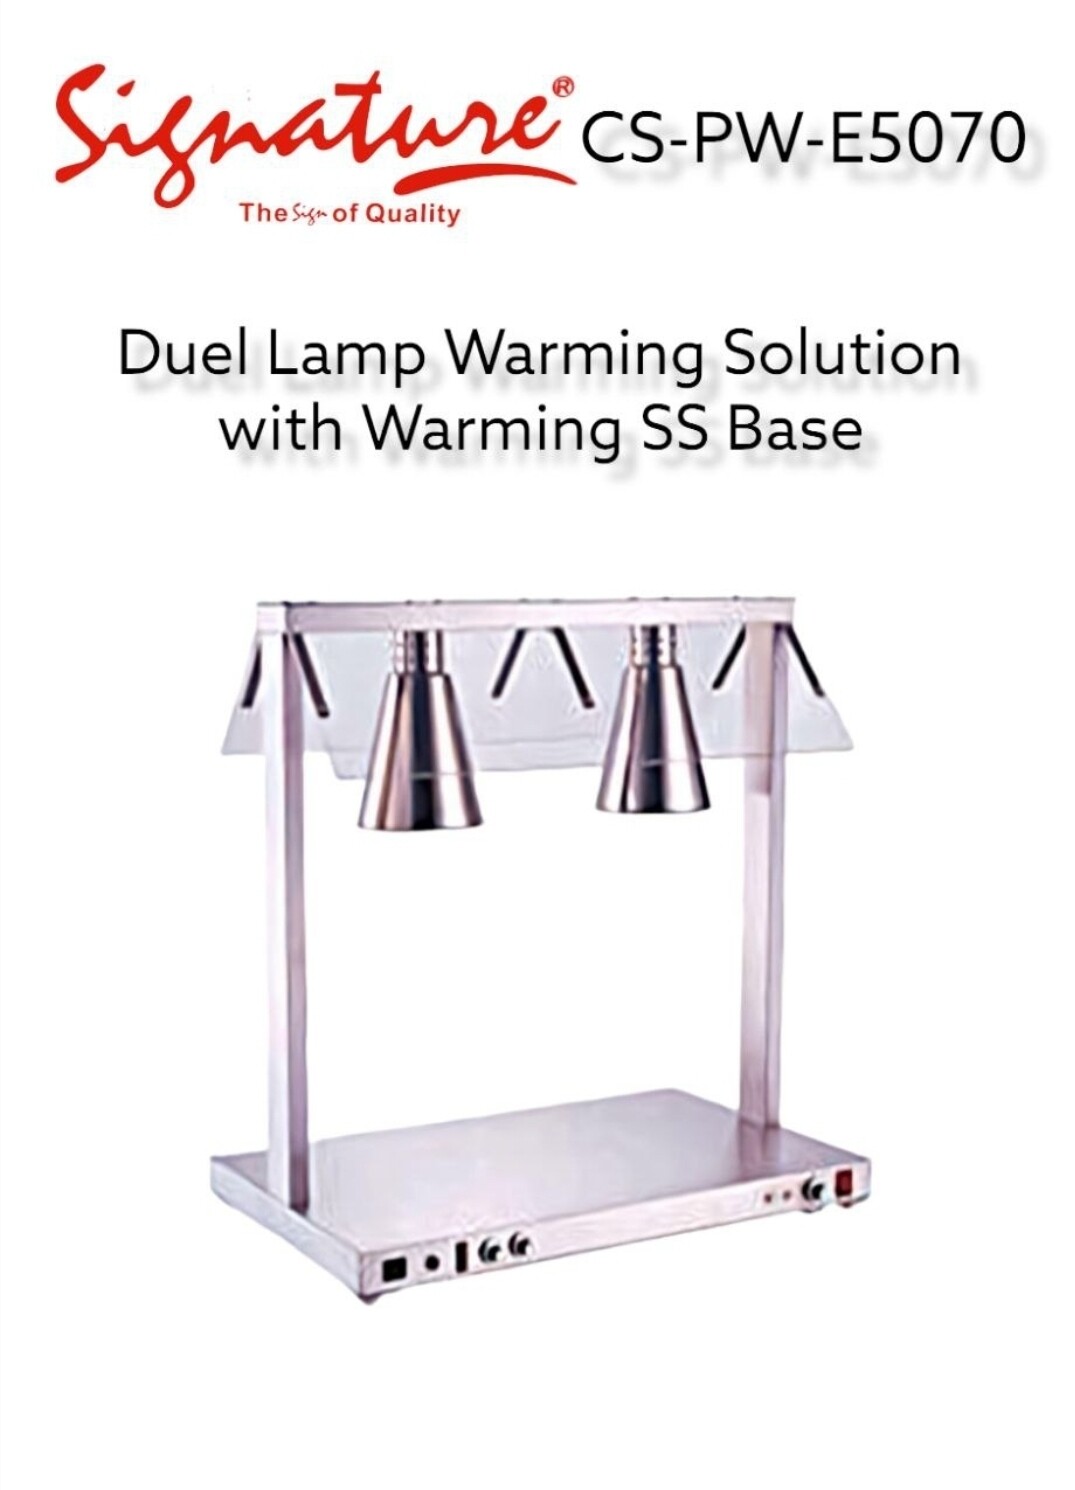 Duel Lamps Warming Solution with Wearing SS Base CS-PW-E5070